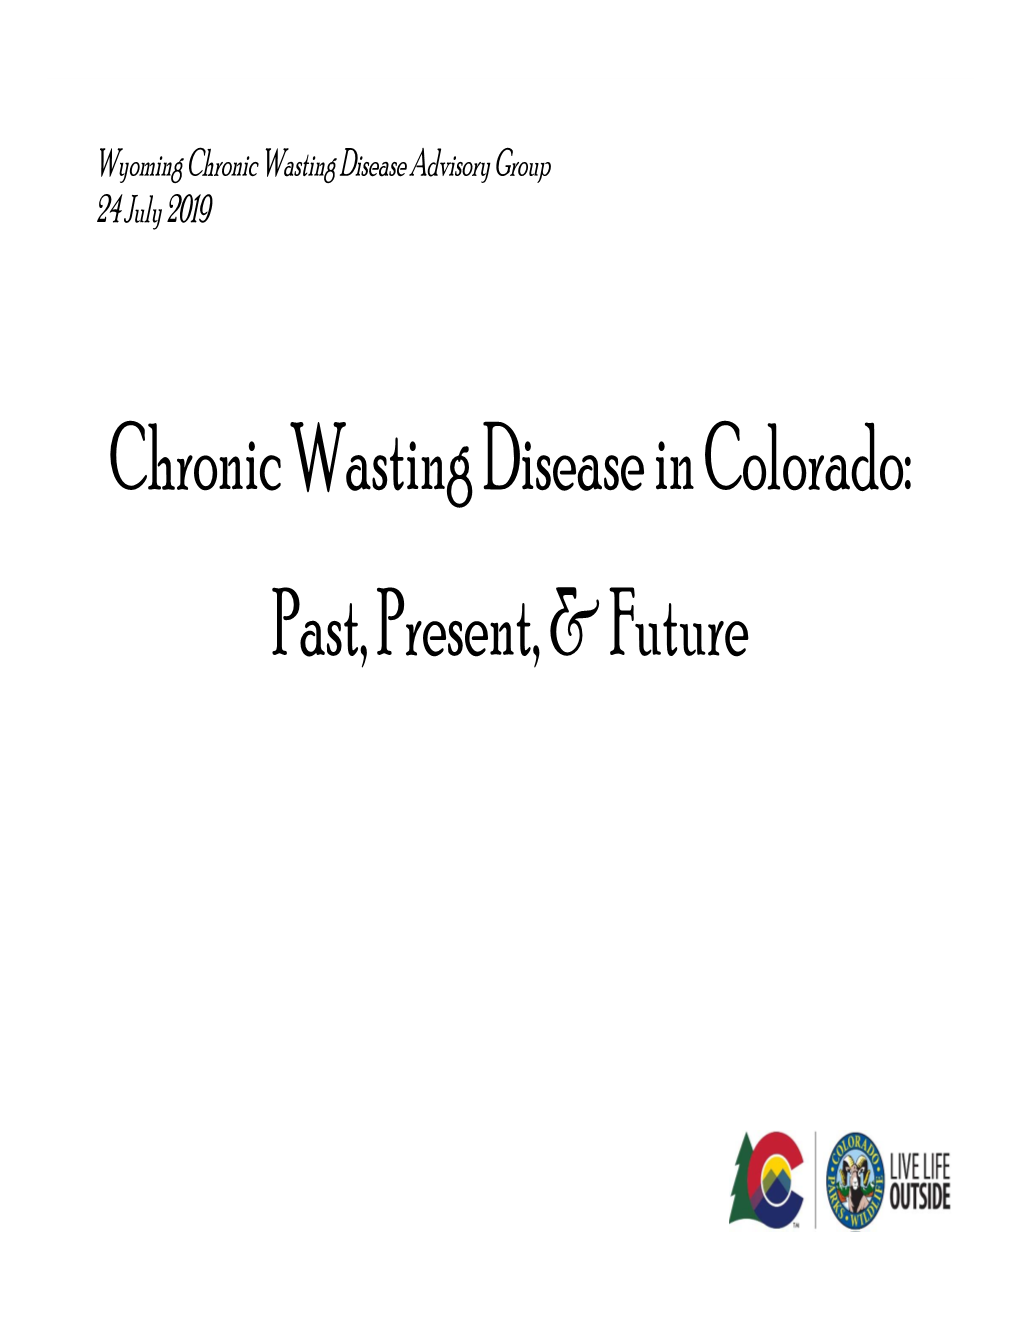 Chronic Wasting Disease in Colorado: Past, Present, & Future